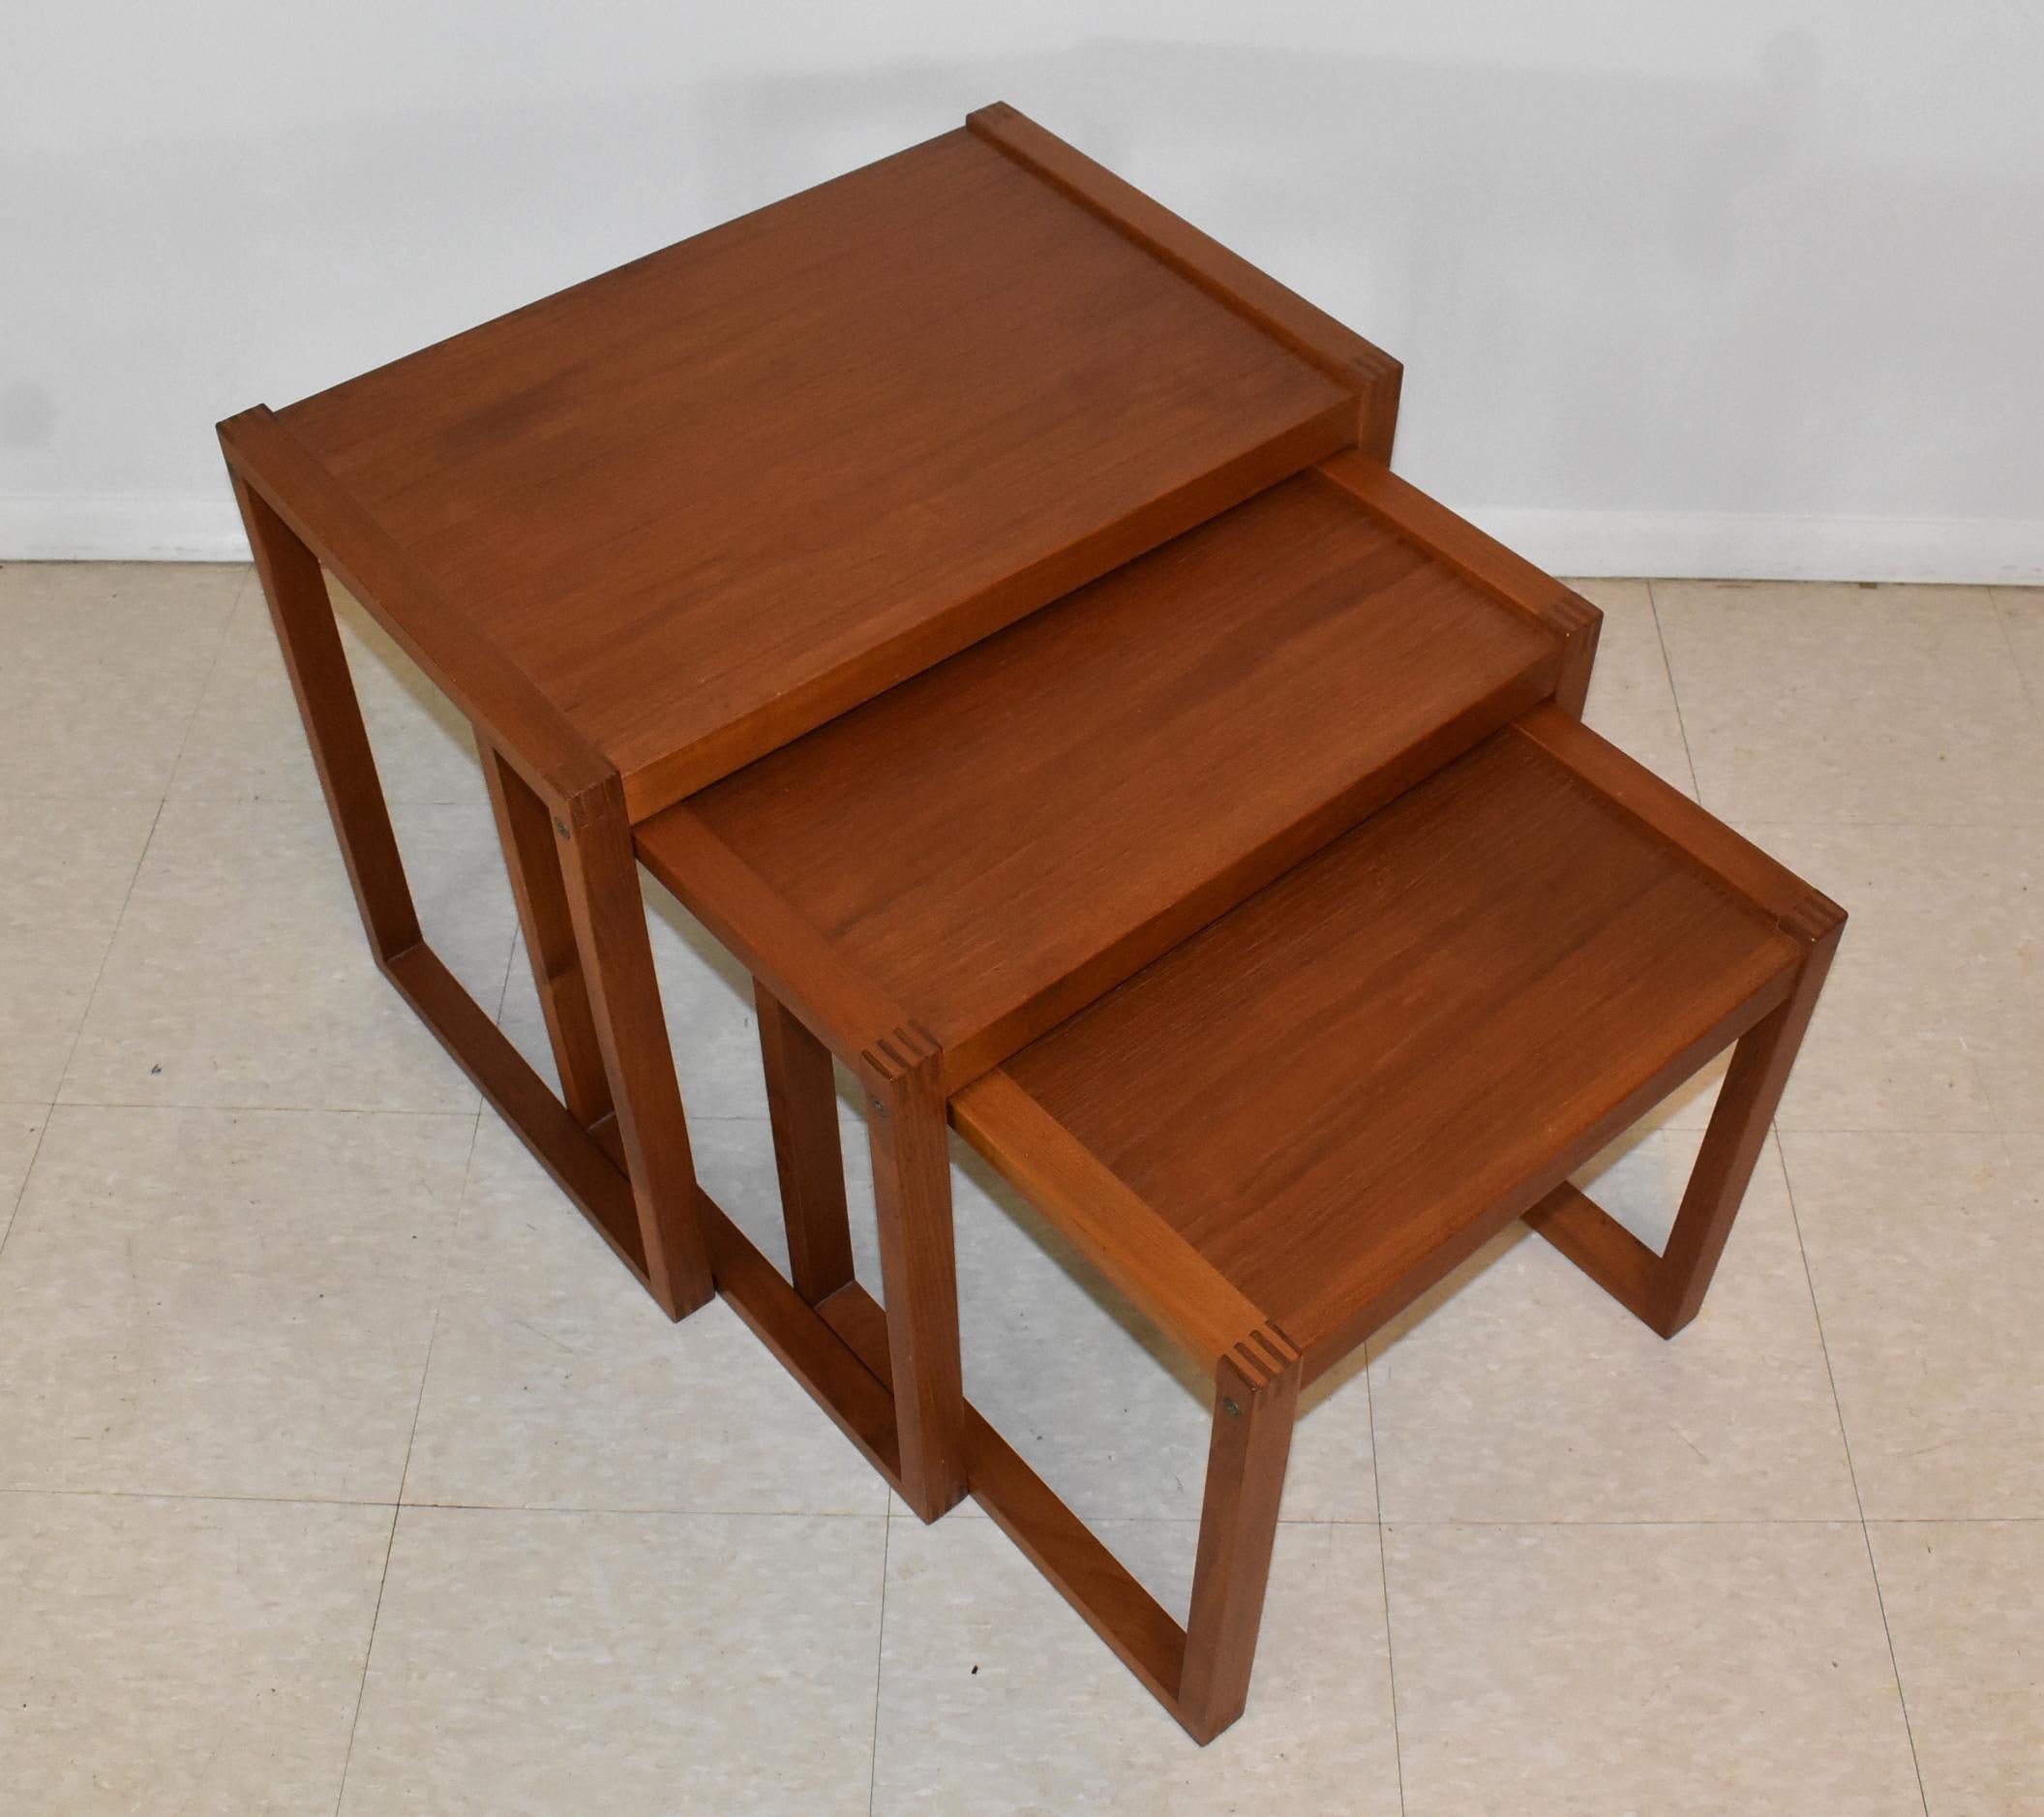 Set of three Danish modern teak nesting tables by Vi-Ma Mobler. Finger joint construction. All tables stamped Denmark. One table has small dark water ring. All in very good condition. Tallest table measures 16